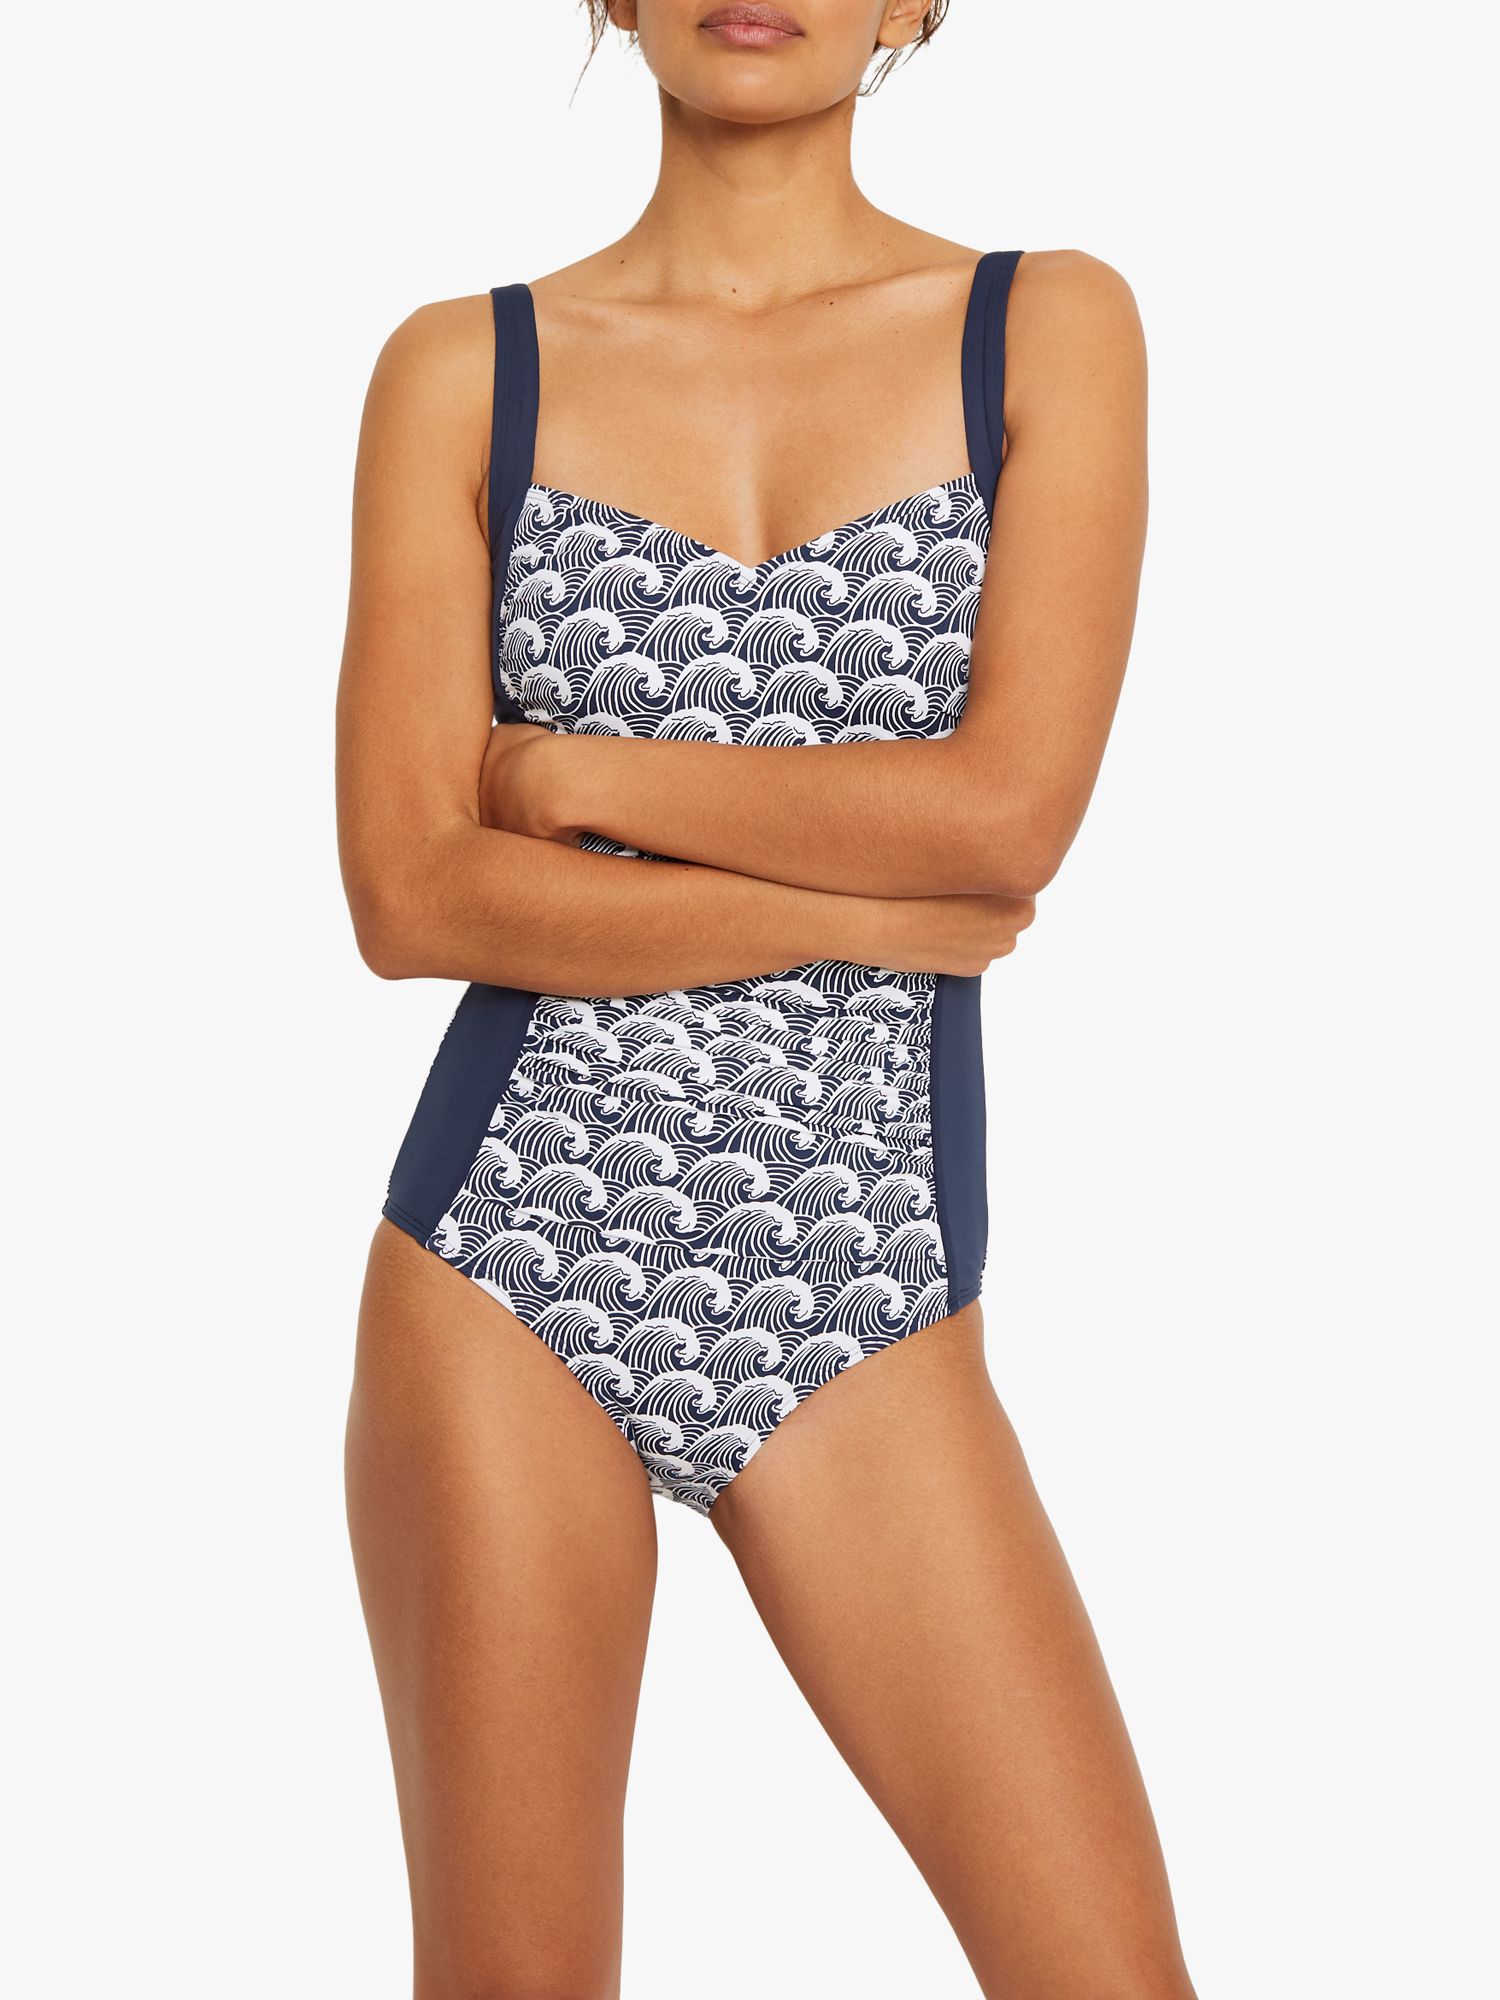 White Stuff Wave Print Ruched Swimsuit, Rich Navy